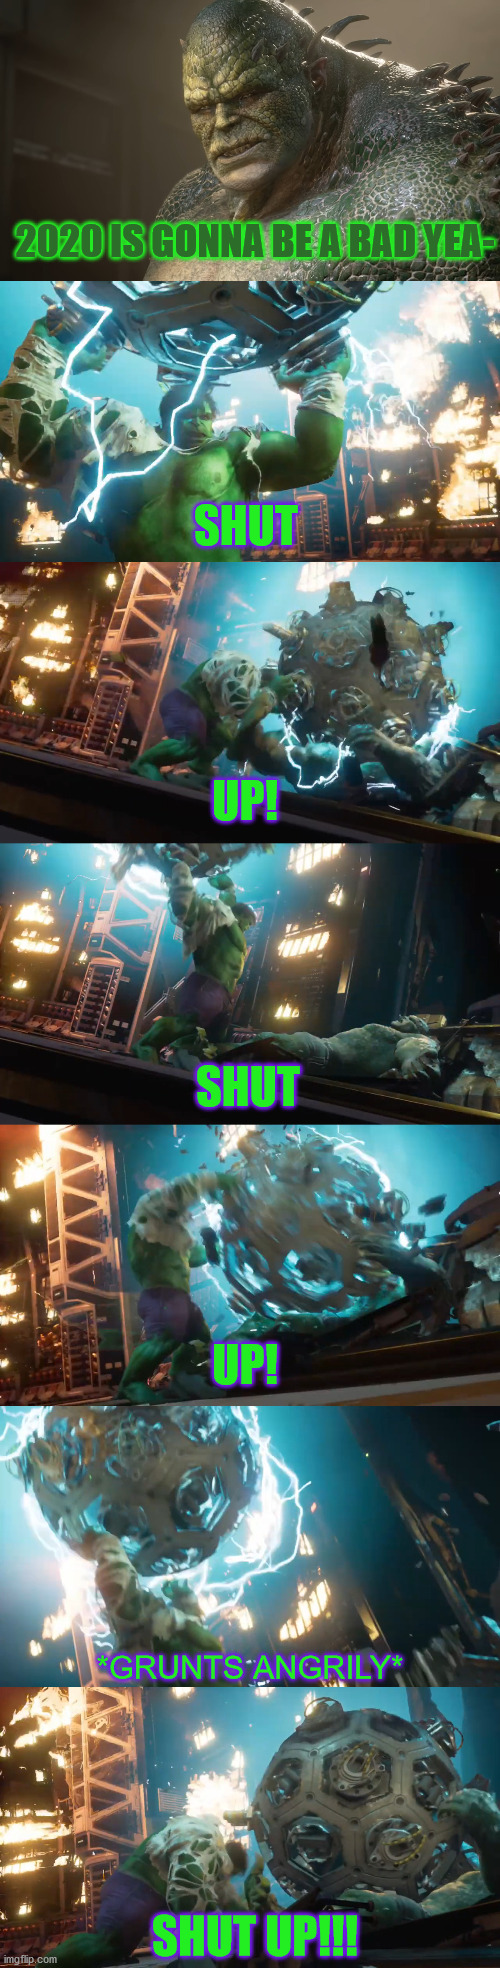 2020 IS GONNA BE A BAD YEA-; SHUT; UP! SHUT; UP! *GRUNTS ANGRILY*; SHUT UP!!! | image tagged in memes,funny,hulk,avengers video game,marvel,2020 | made w/ Imgflip meme maker